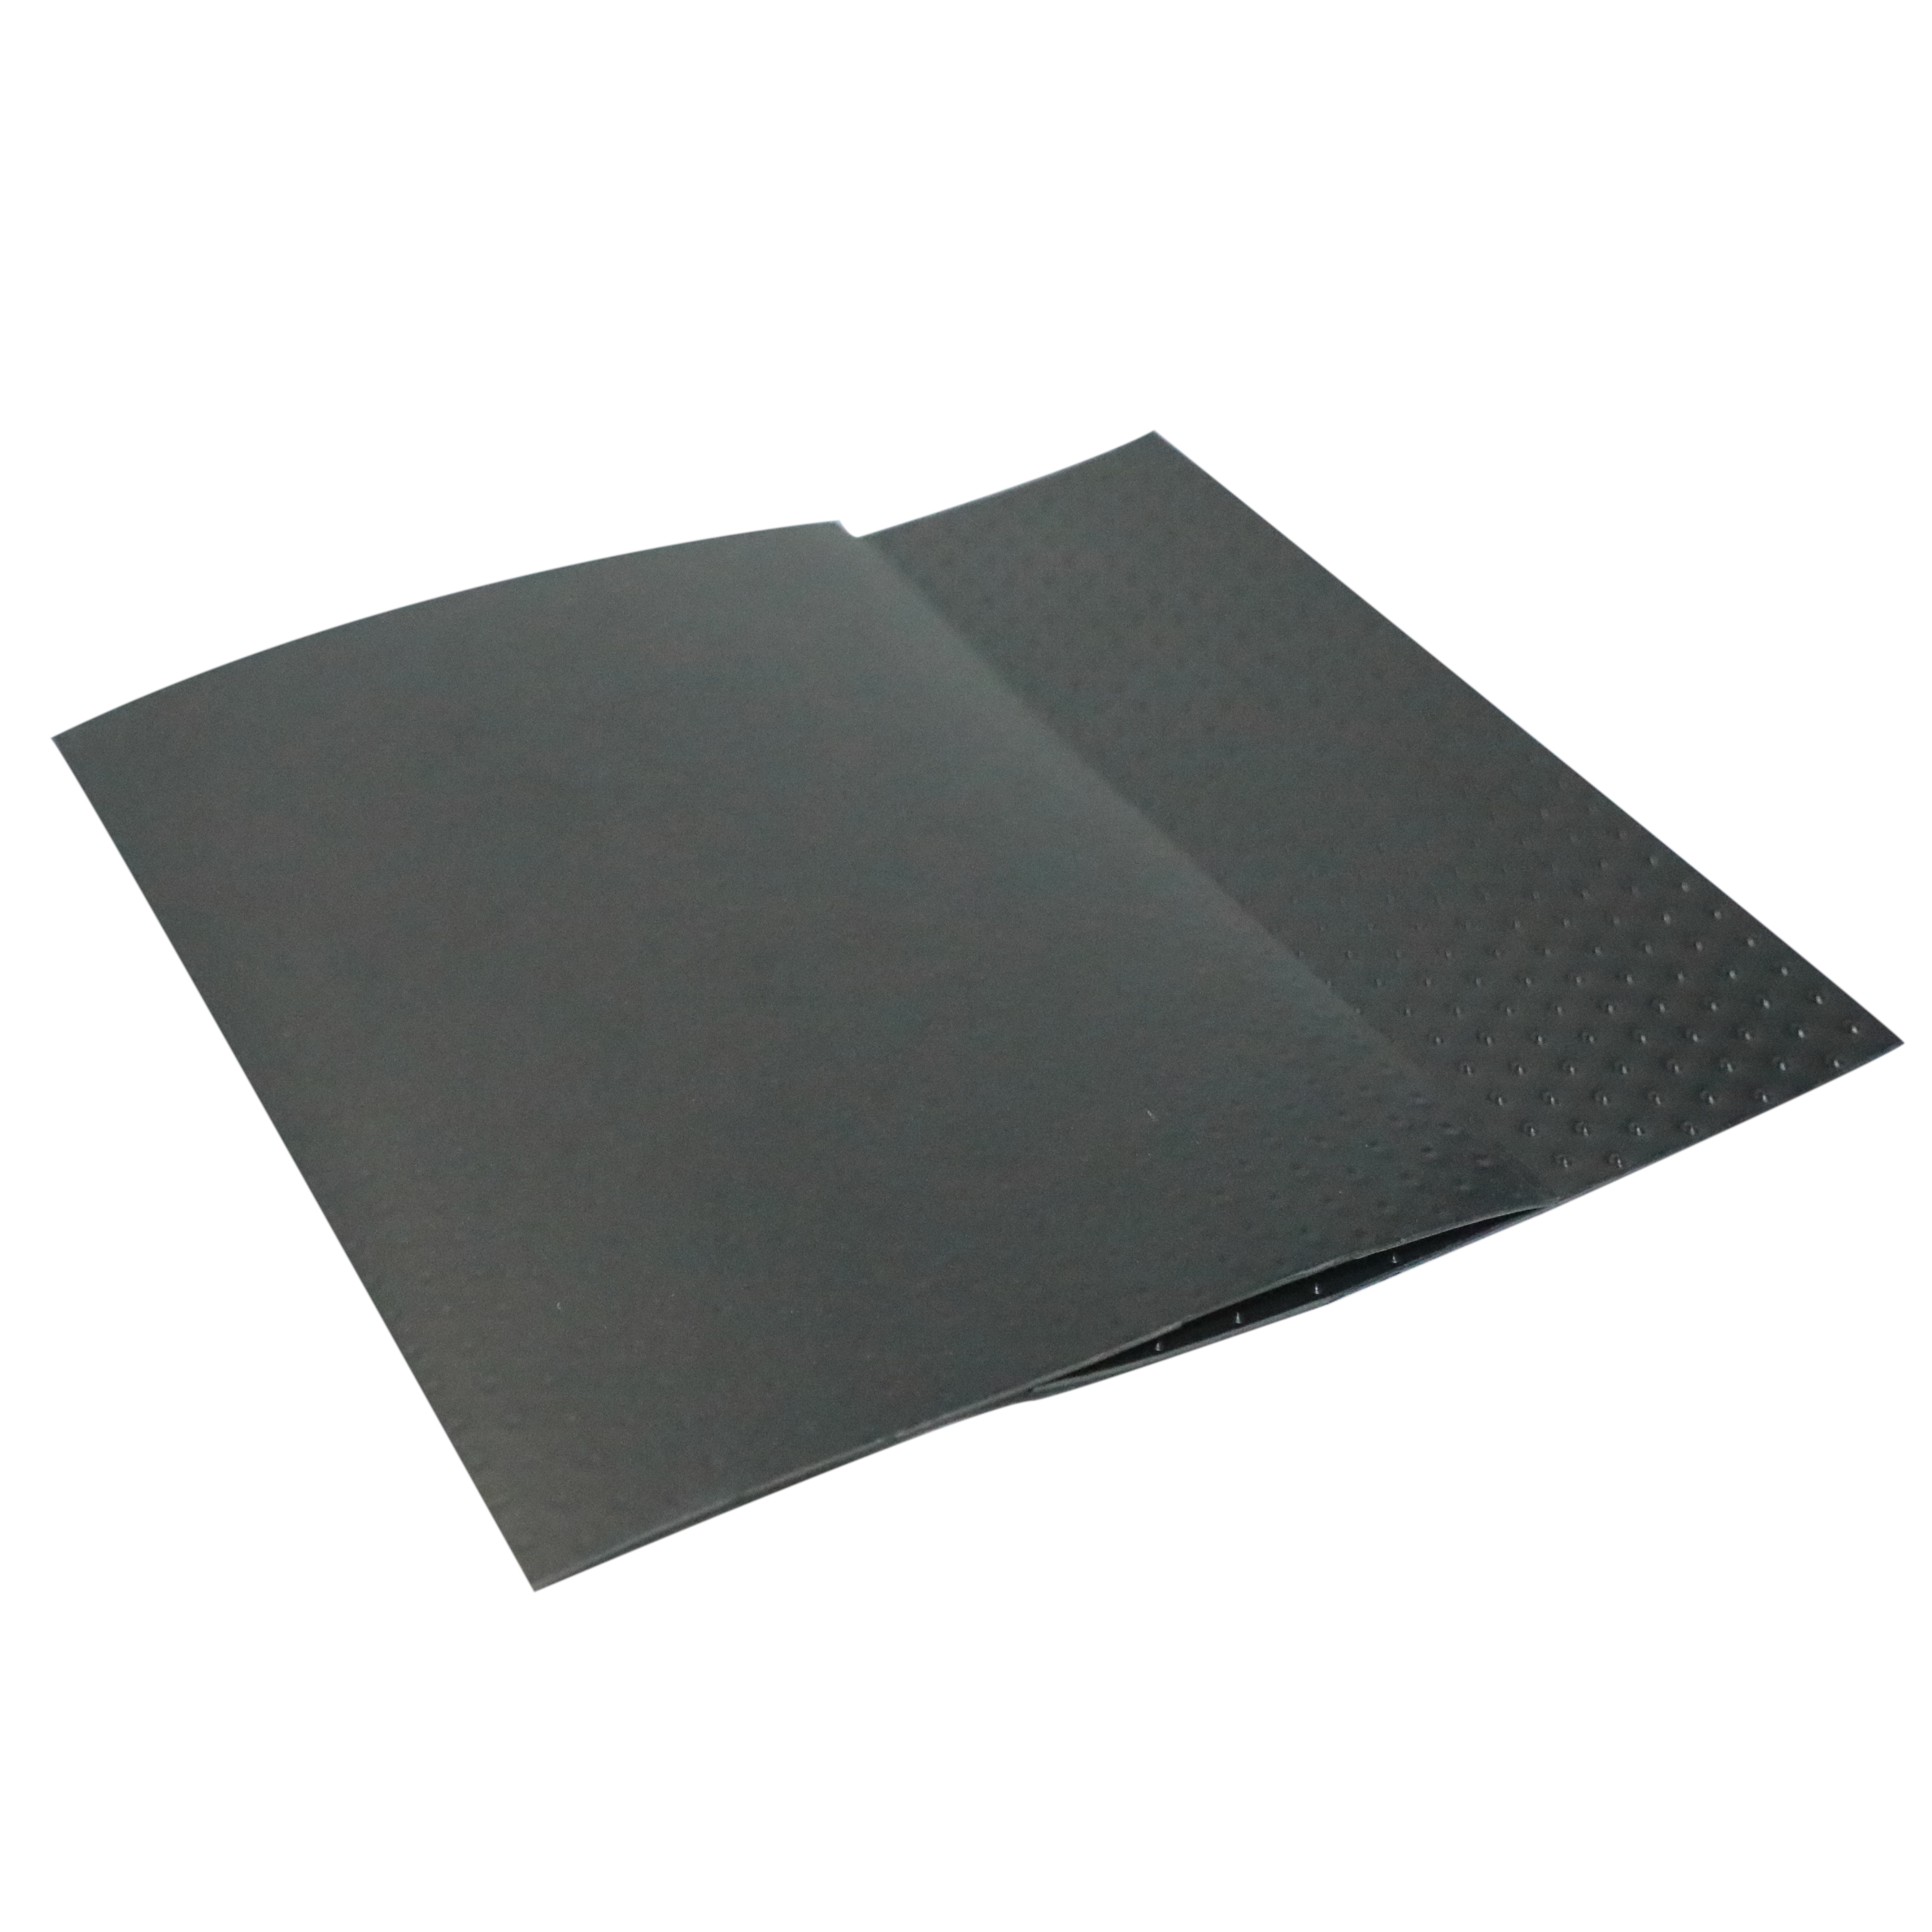 1mm thickness hdpe geomembrane